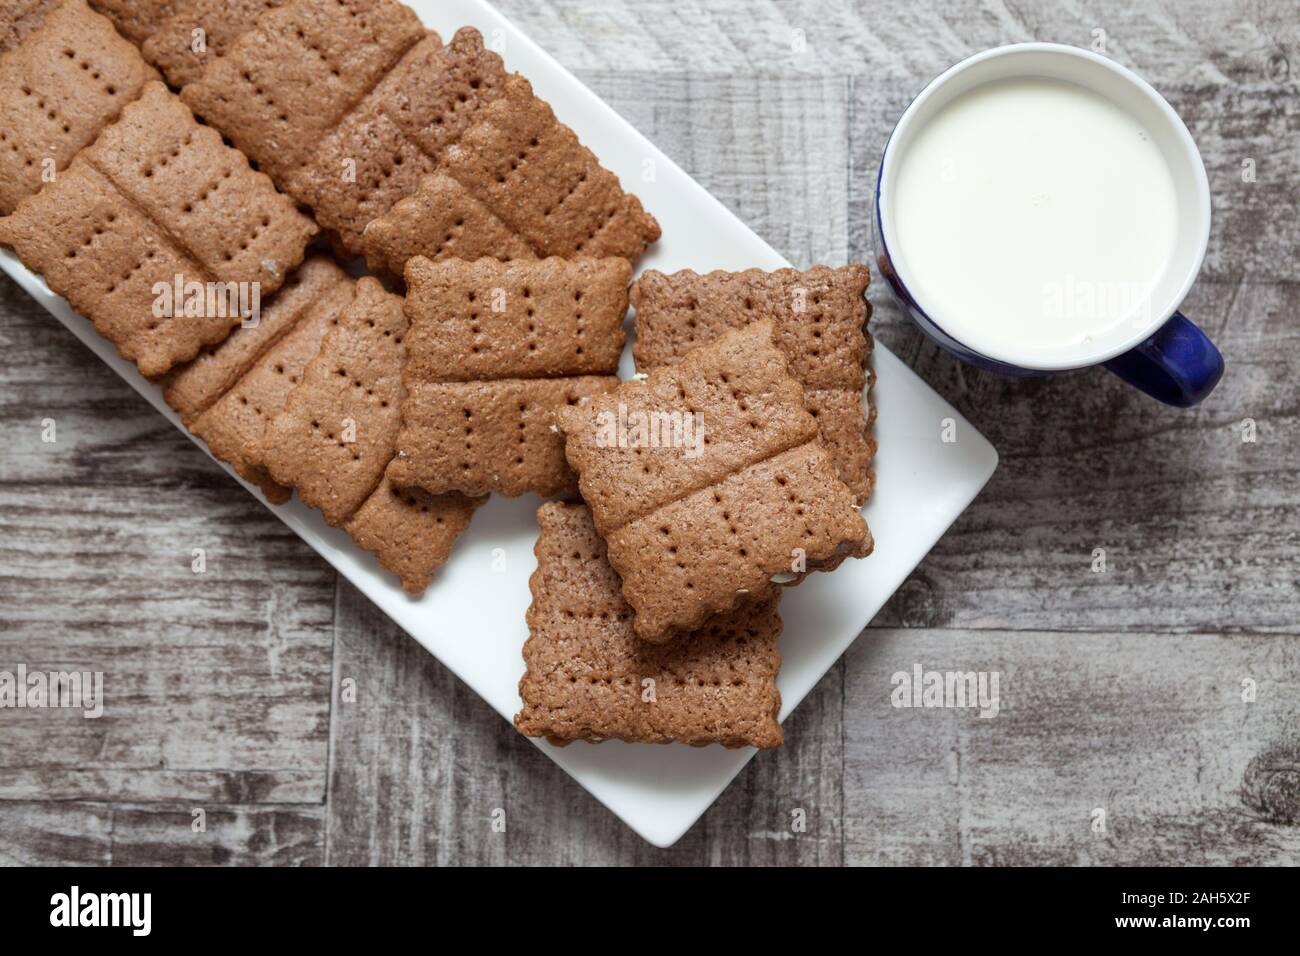 Delicious chocolate chip cookies Stock Photo